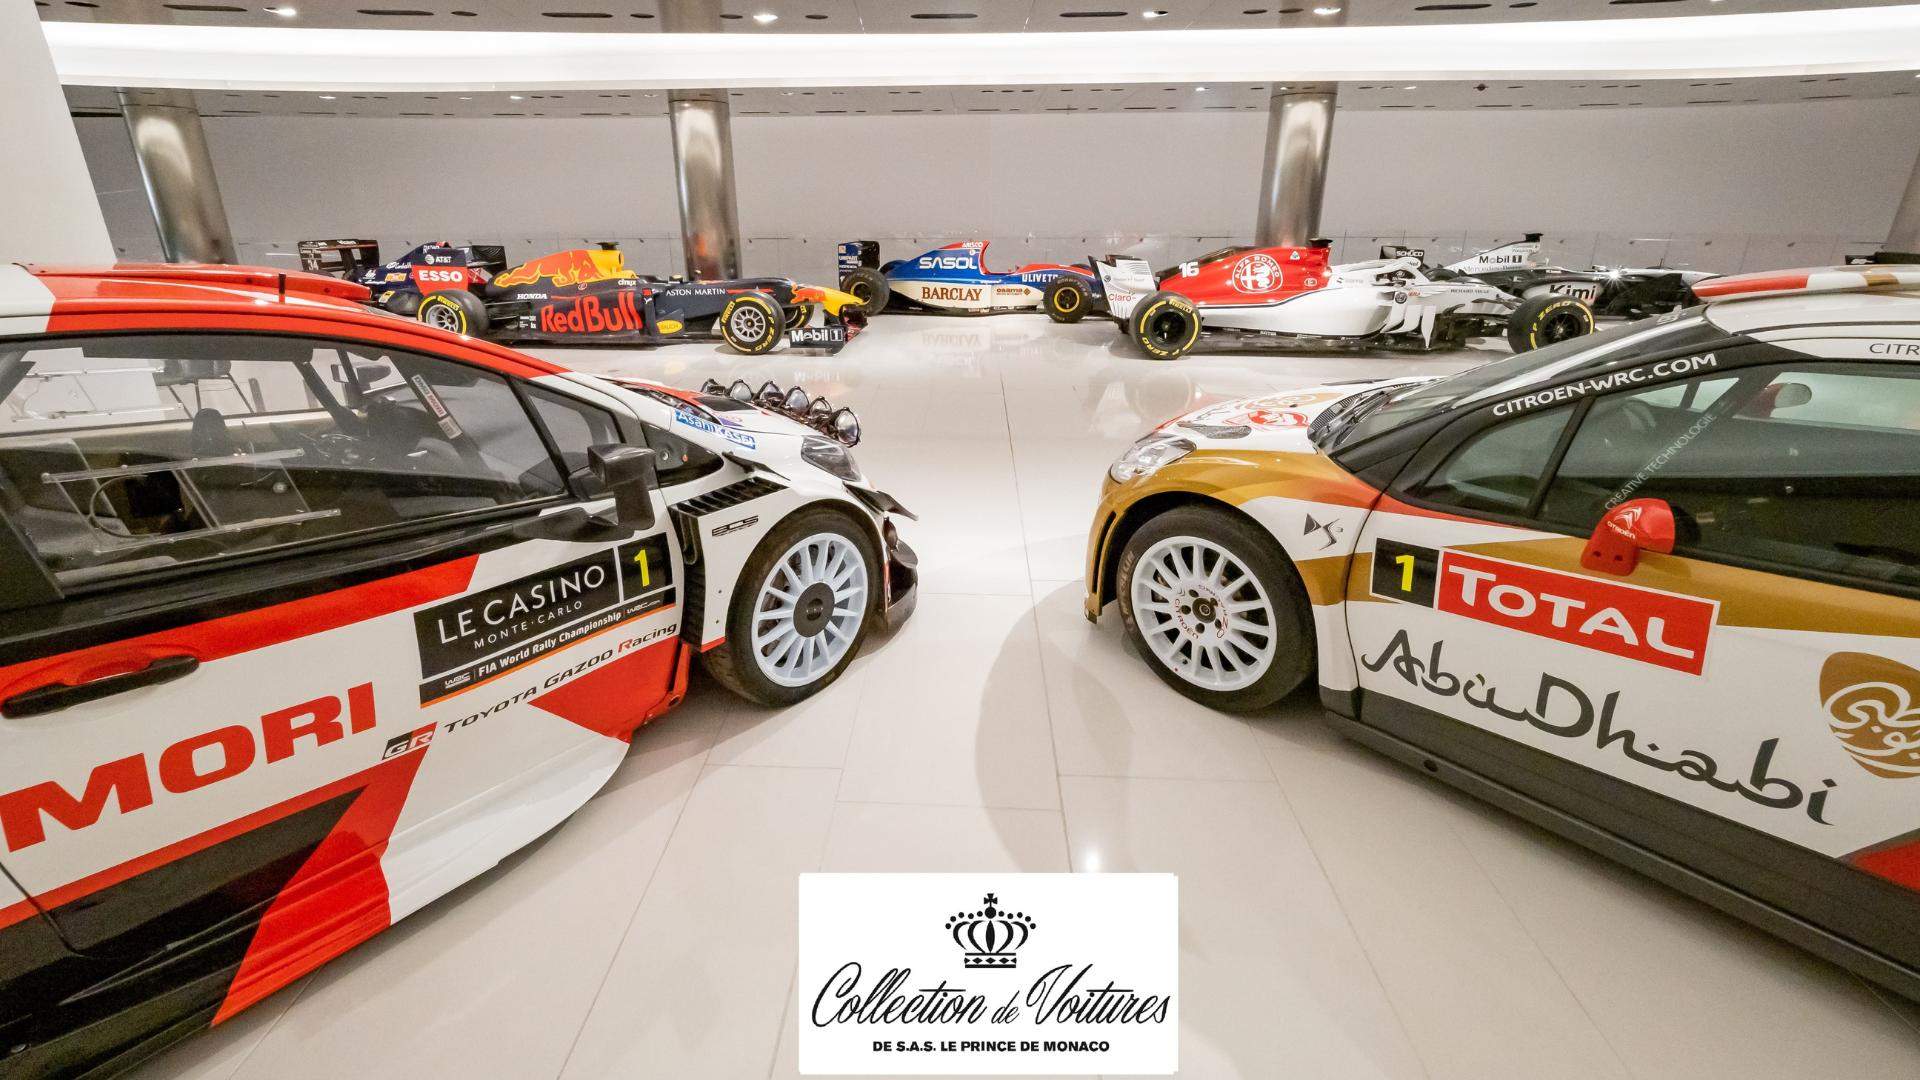 Private Cars Collection of H.S.H. Prince of Monaco